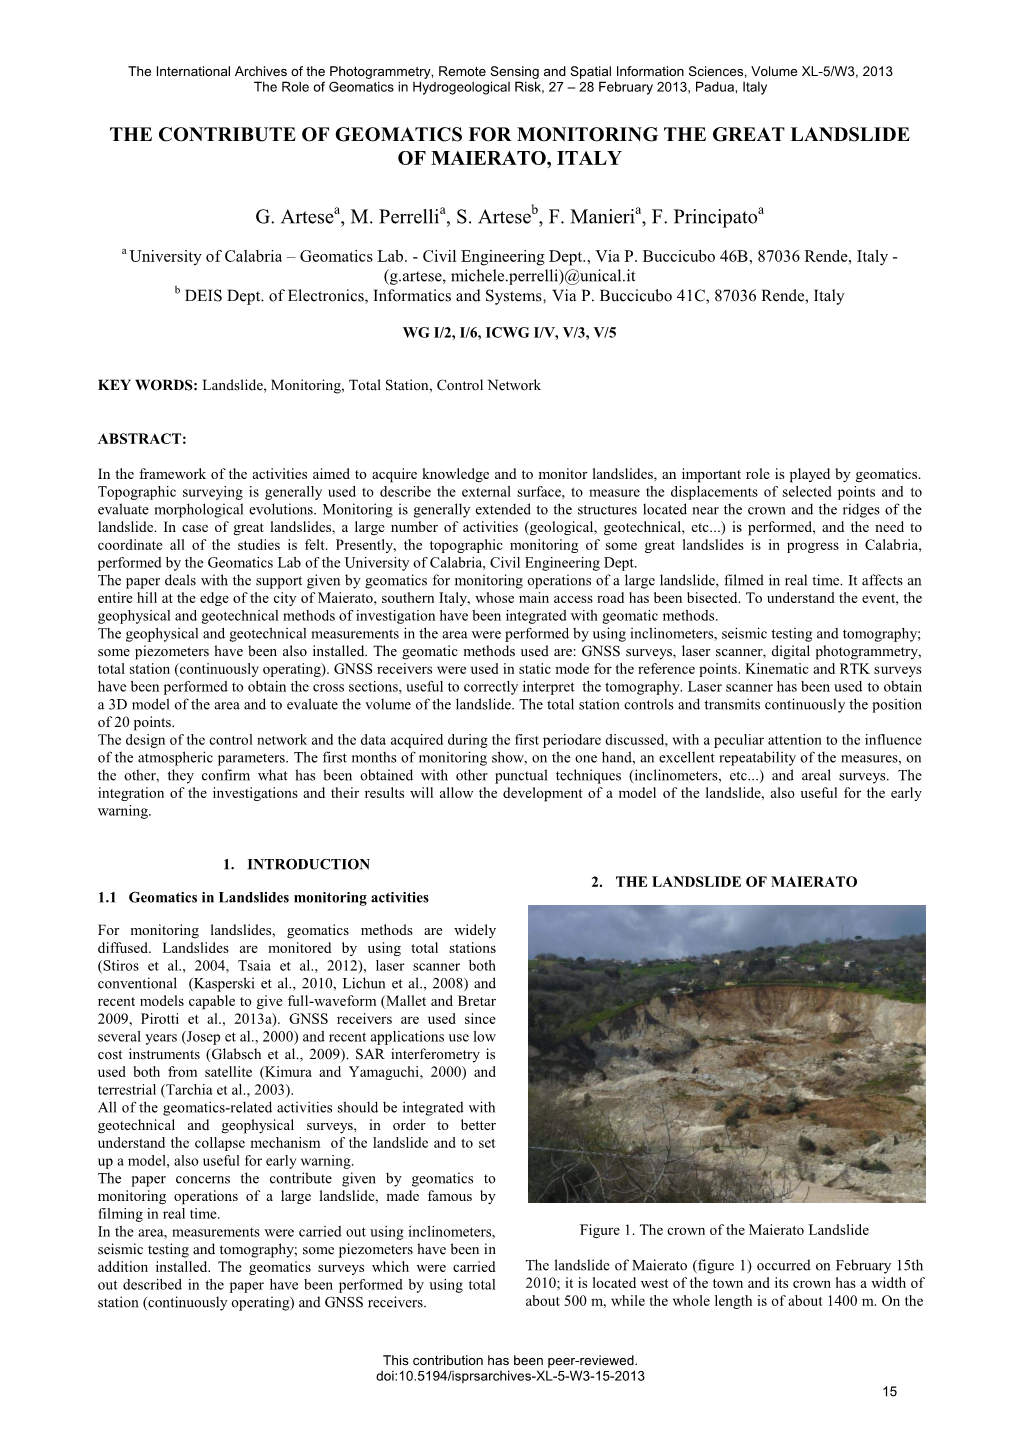 The Contribute of Geomatics for Monitoring the Great Landslide of Maierato, Italy